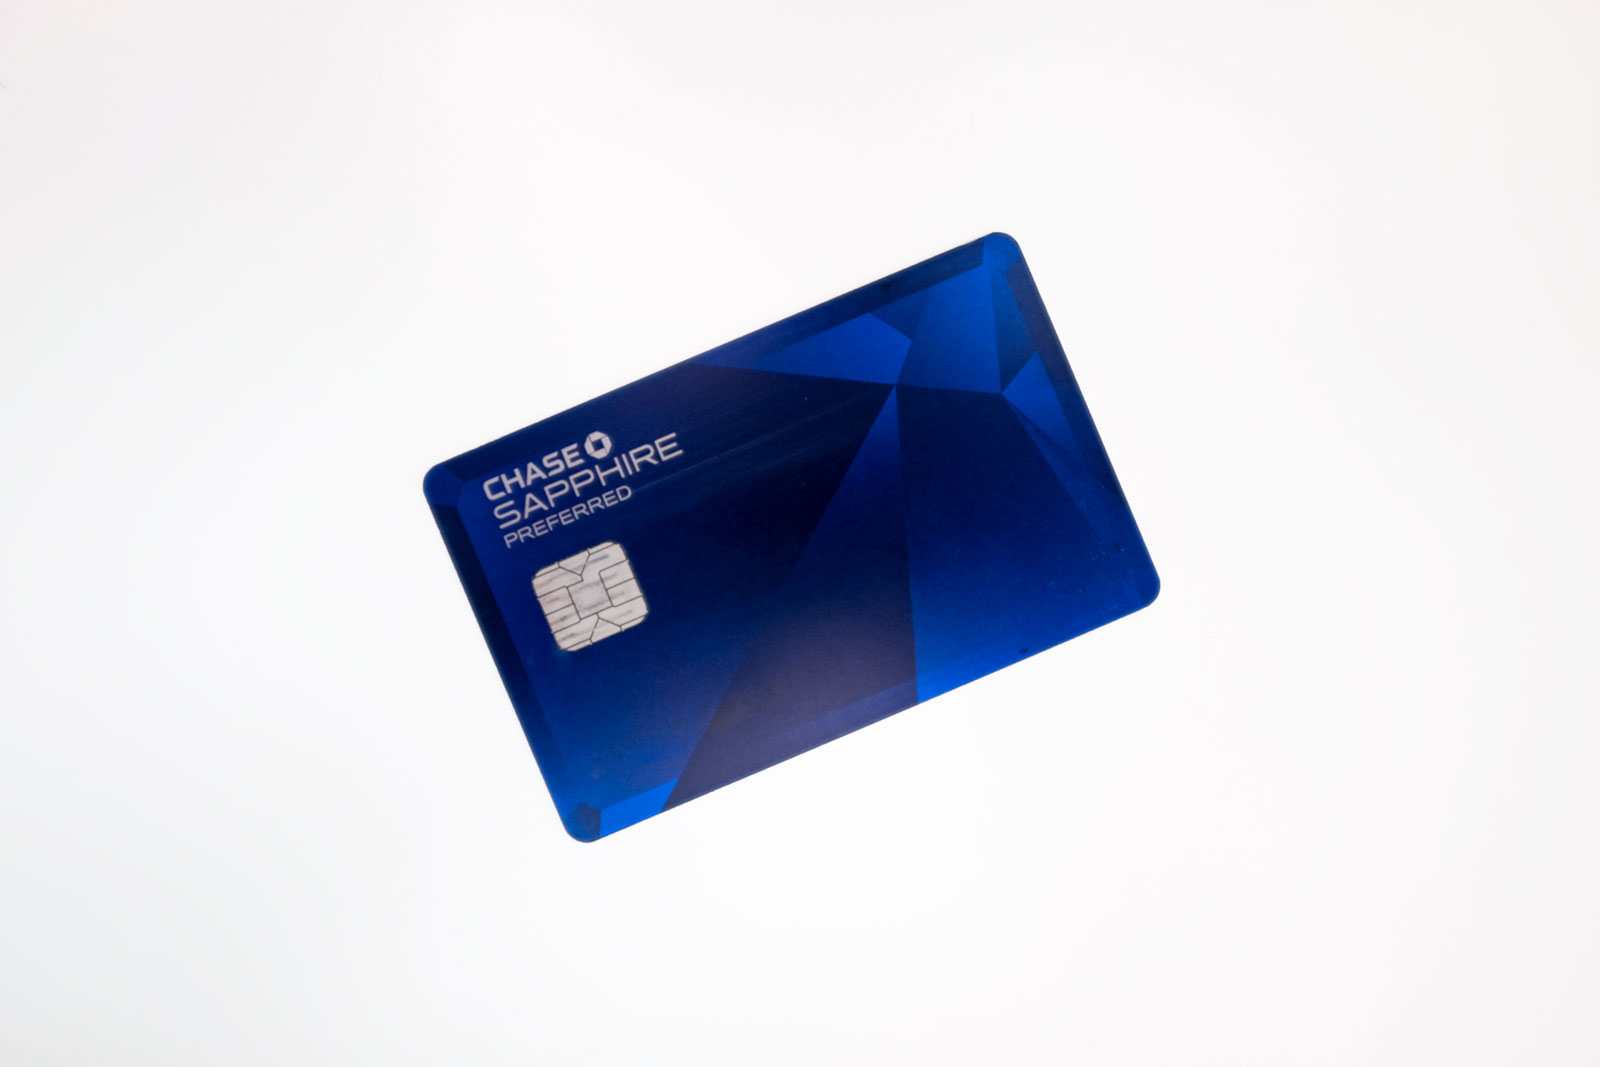 Front of the Chase Sapphire Preferred Credit Card